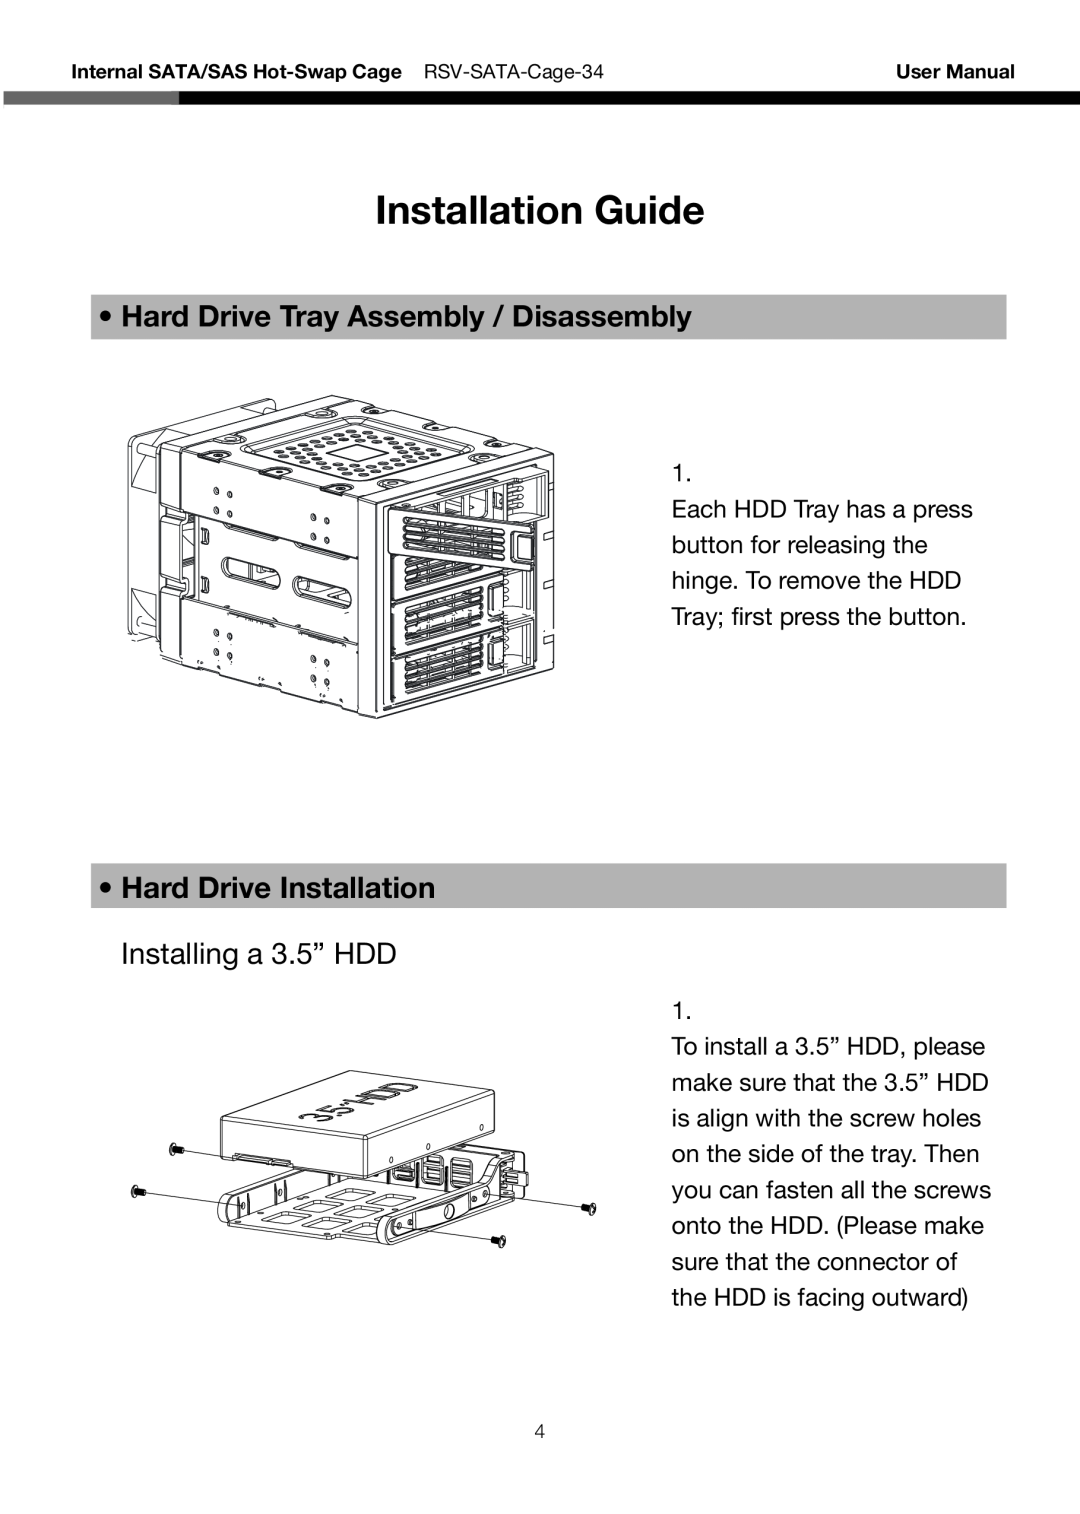 Rosewill RSV-SATA-Cage-34 user manual Installation Guide, Hard Drive Tray Assembly / Disassembly 